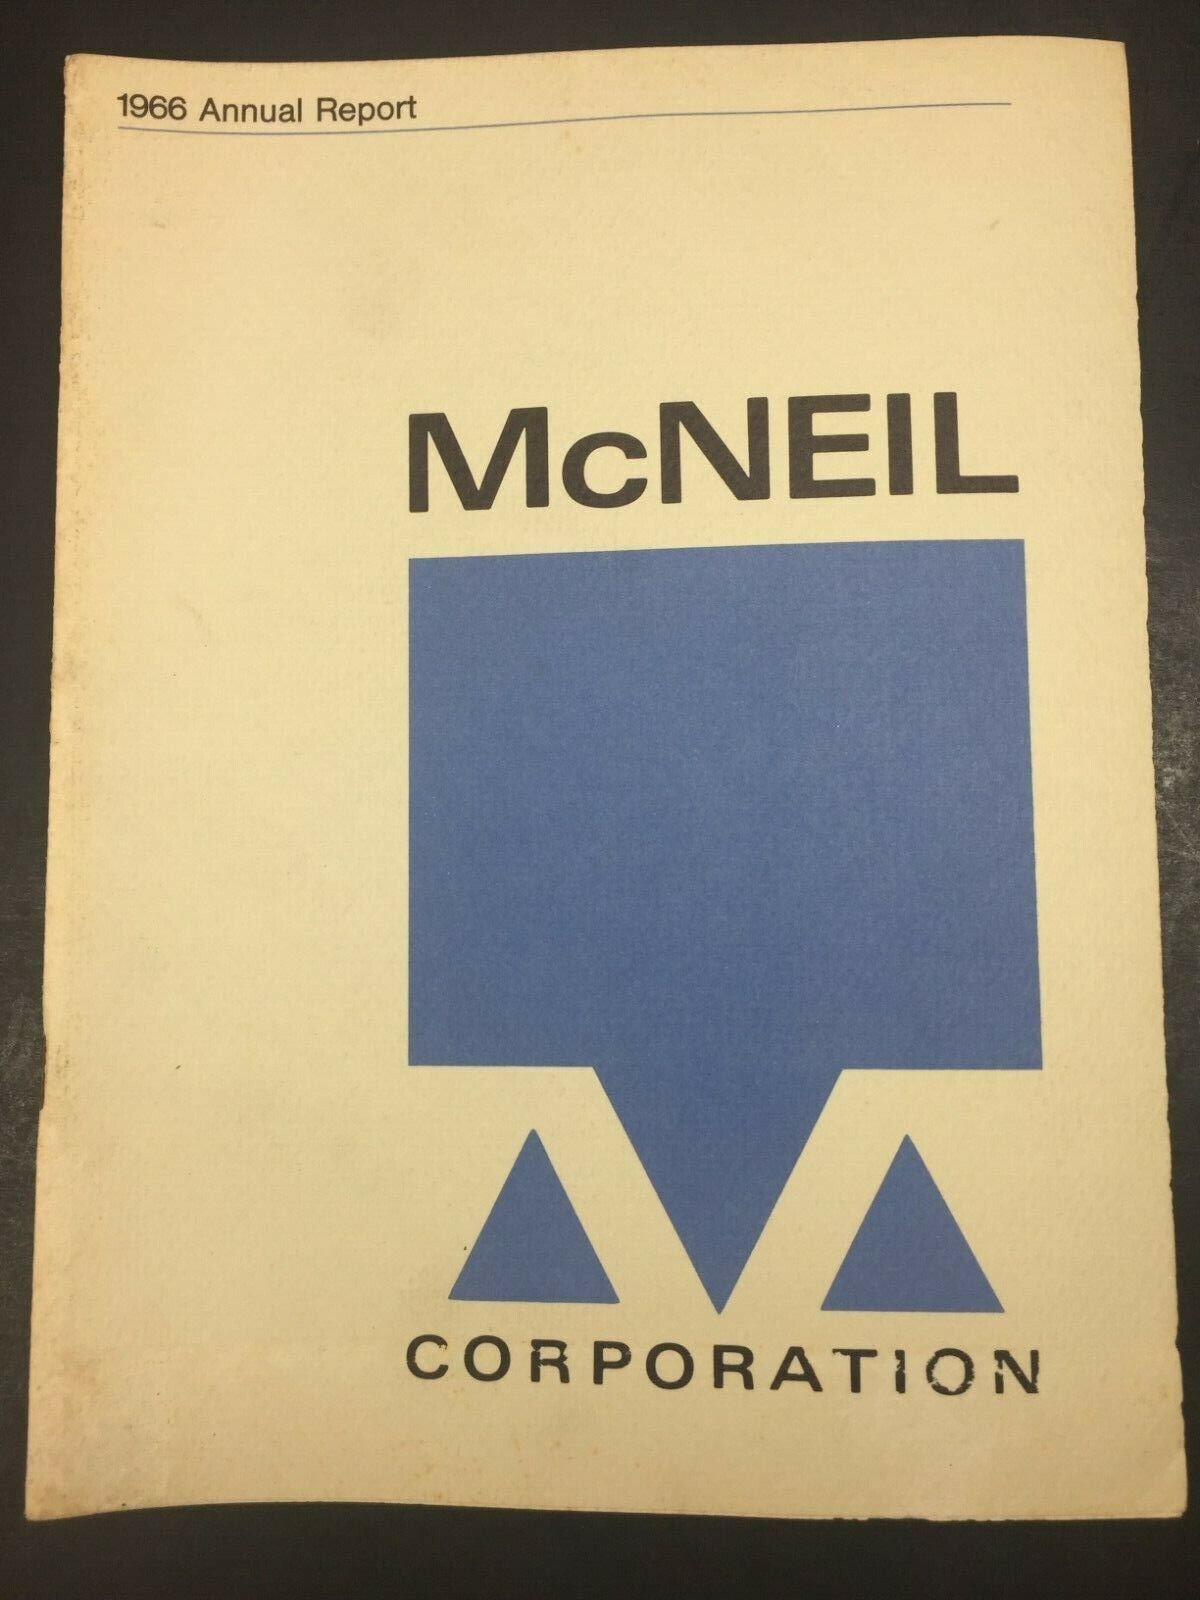 Vintage 1966 Mcneil Akron Corporation Co Annual Report Industrial Machinery 20pg